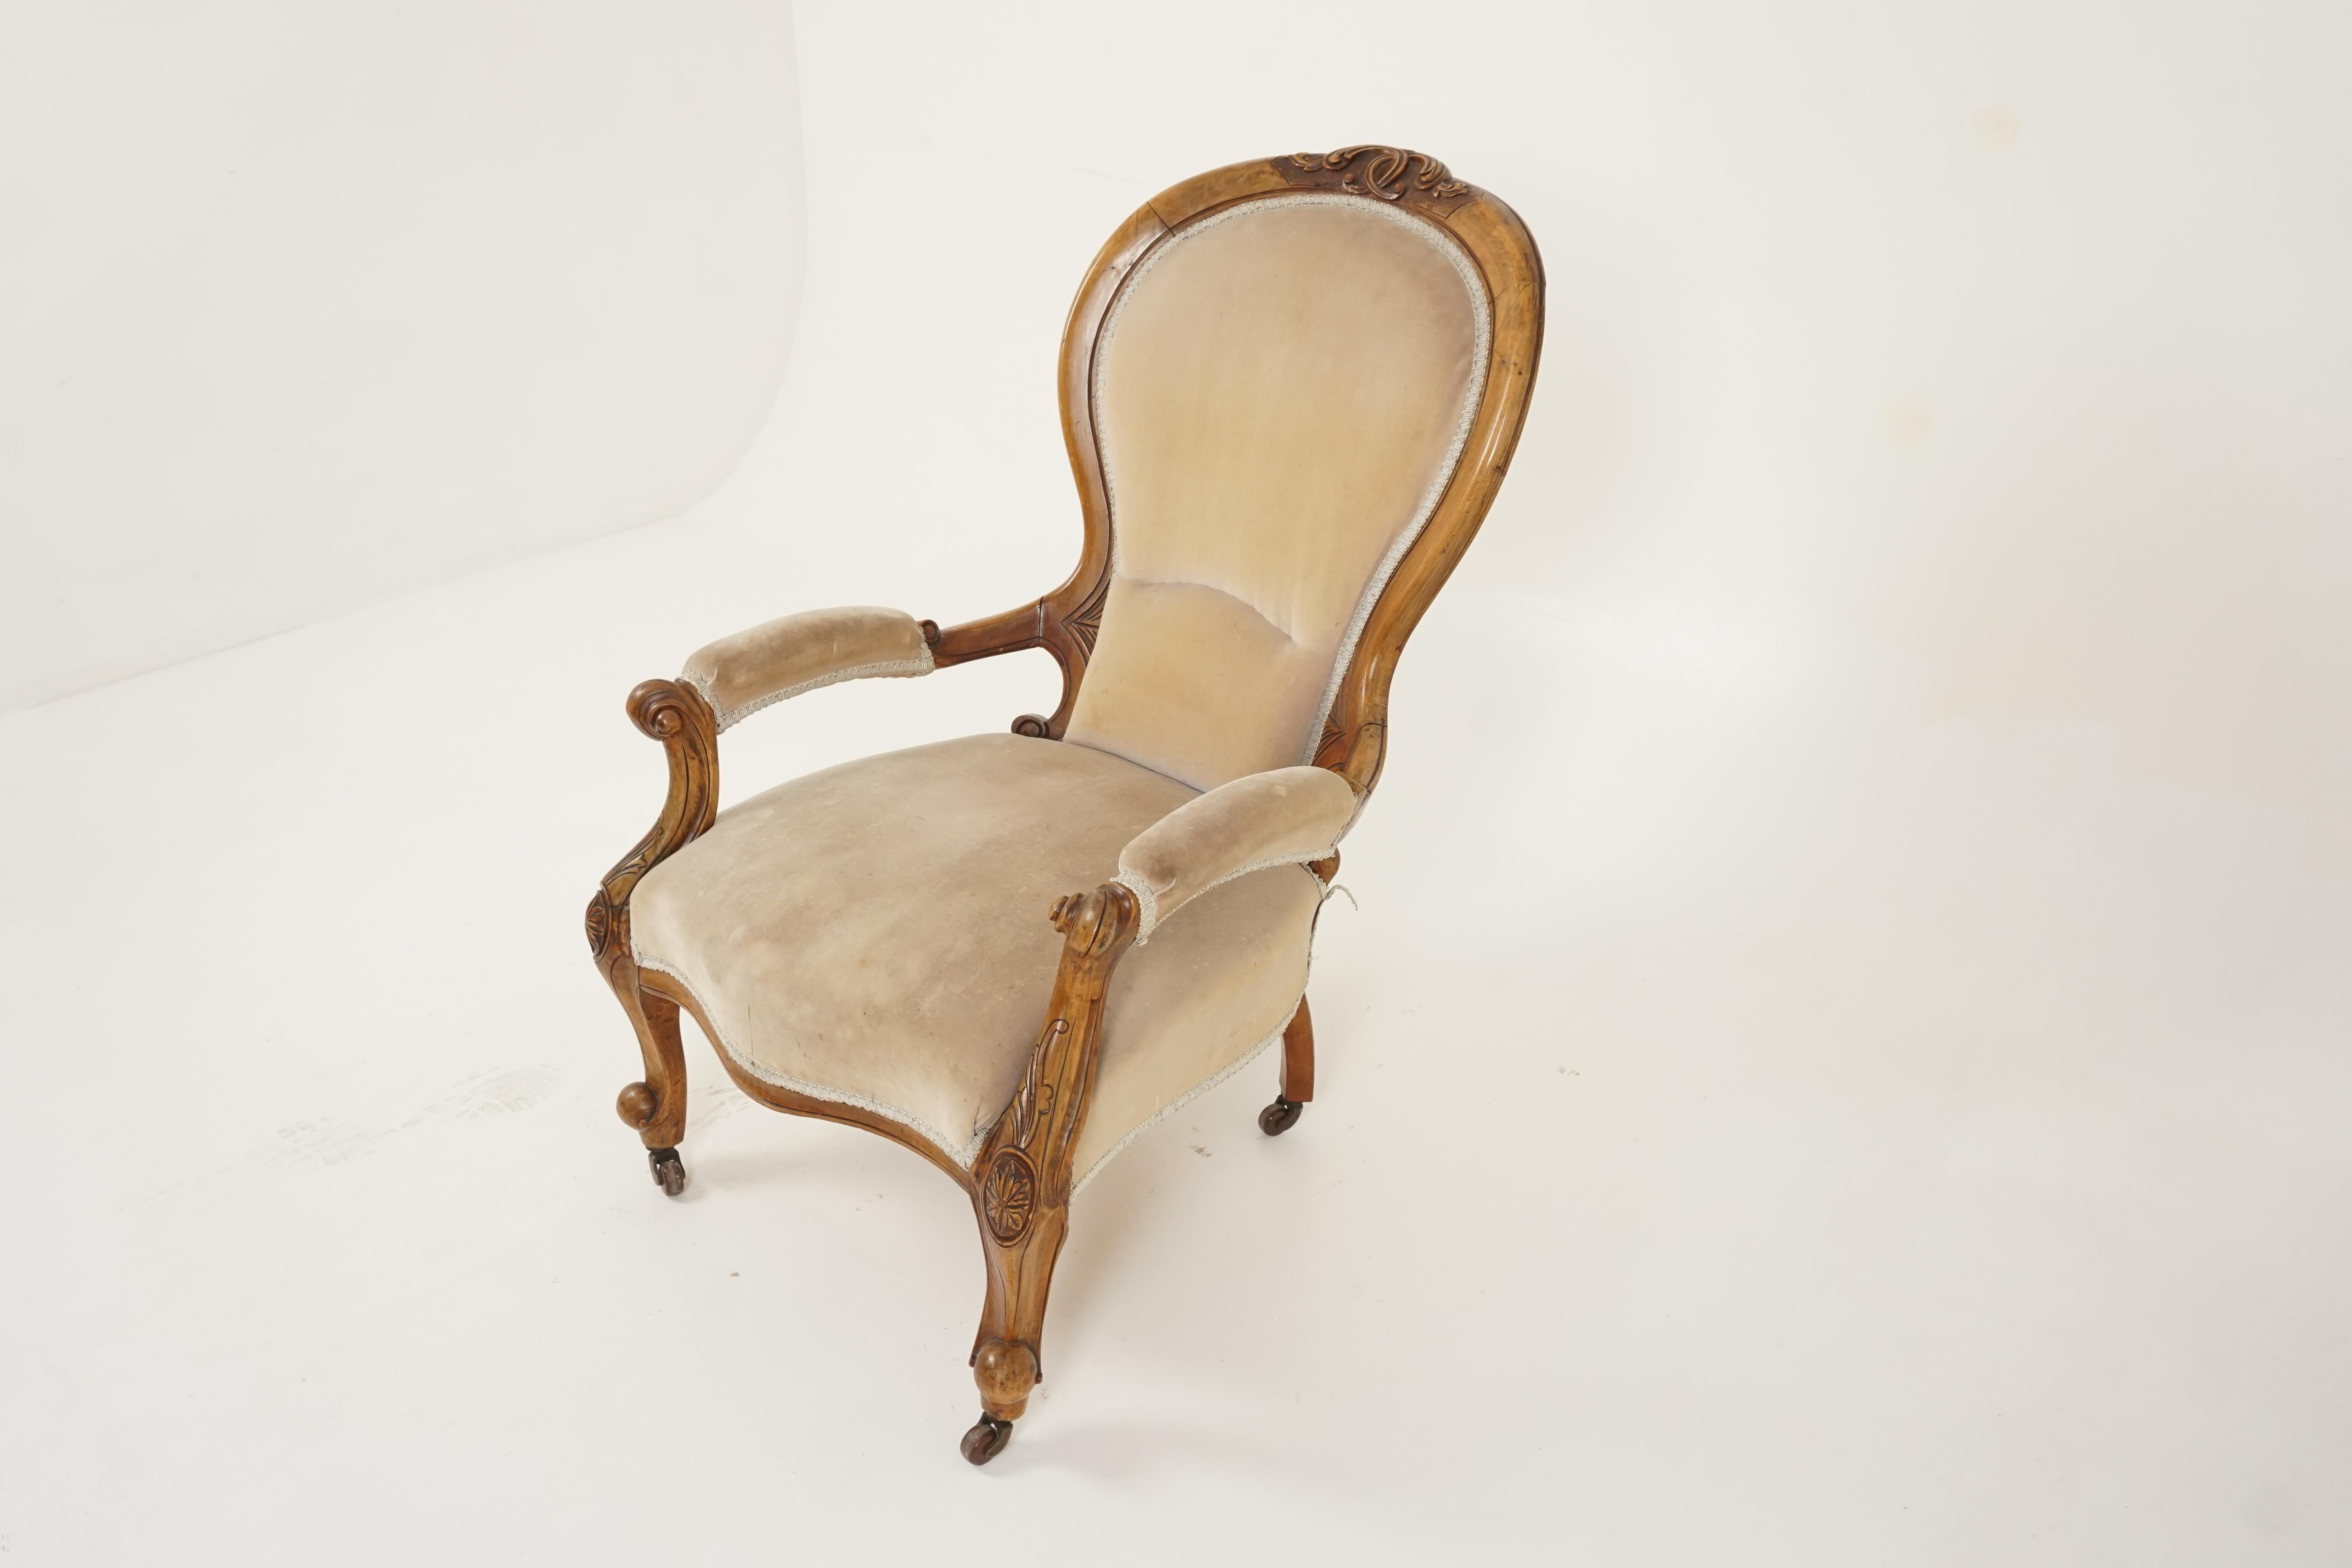 Antique Victorian chair, walnut, spoon back, gentlemen's parlour chair, Scotland 1870, H282

Scotland 1870
Solid walnut
Original finish
Carved cartouche to the center of the top rail
Upholstered back with carved supports
Out swept padded arms with a